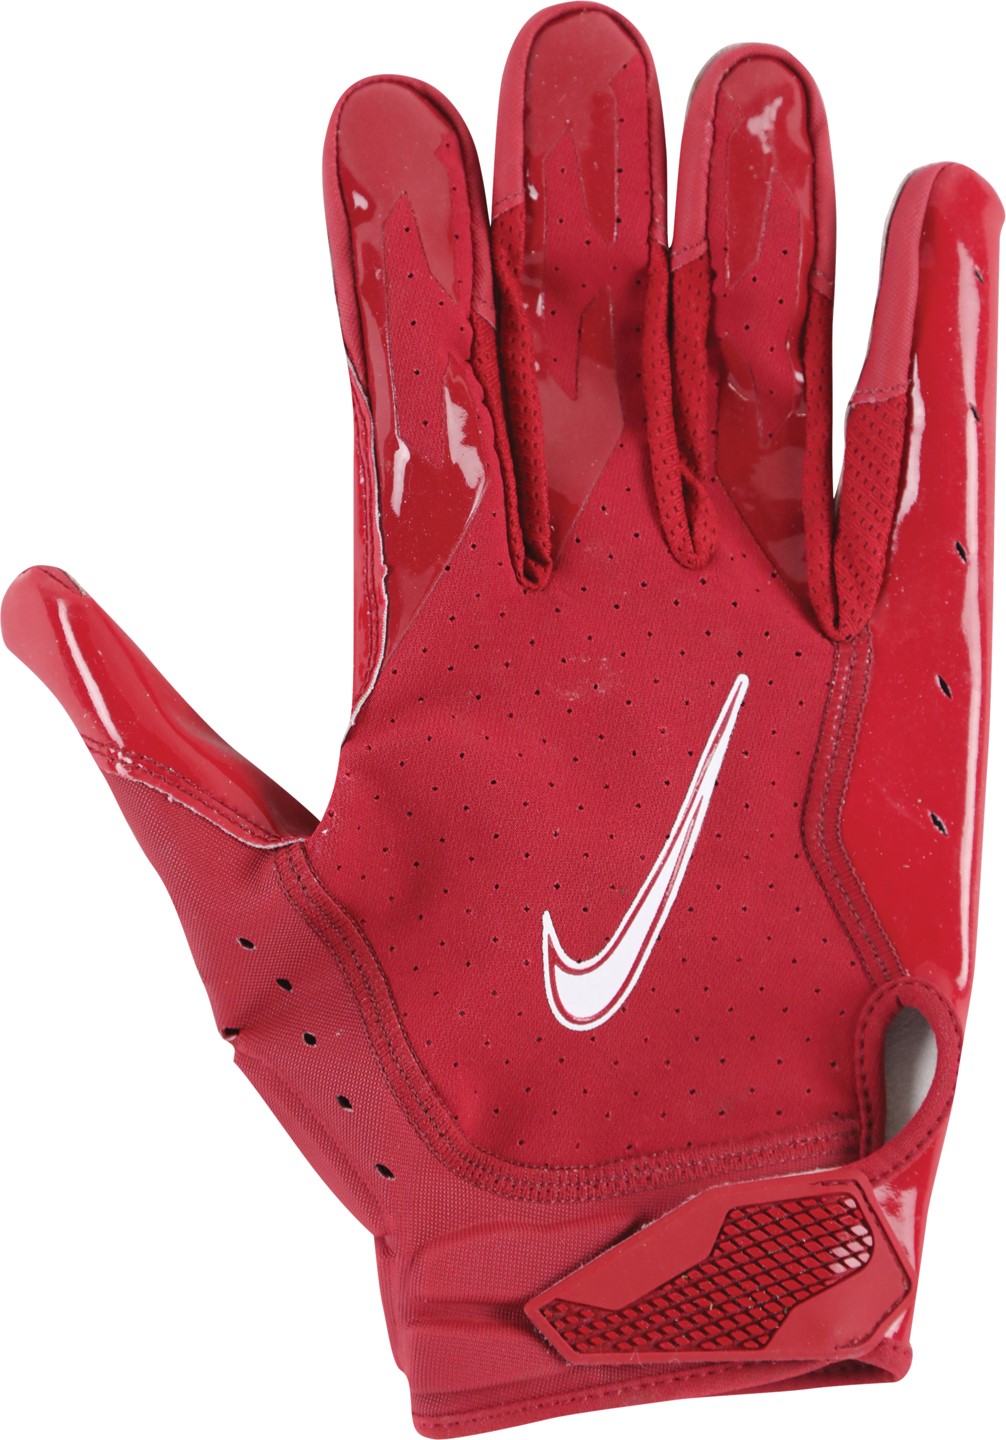 - 2021 Mike Evans Game Worn Glove Used to Catch Tom Brady's 600th Touchdown Pass (Video Proof)